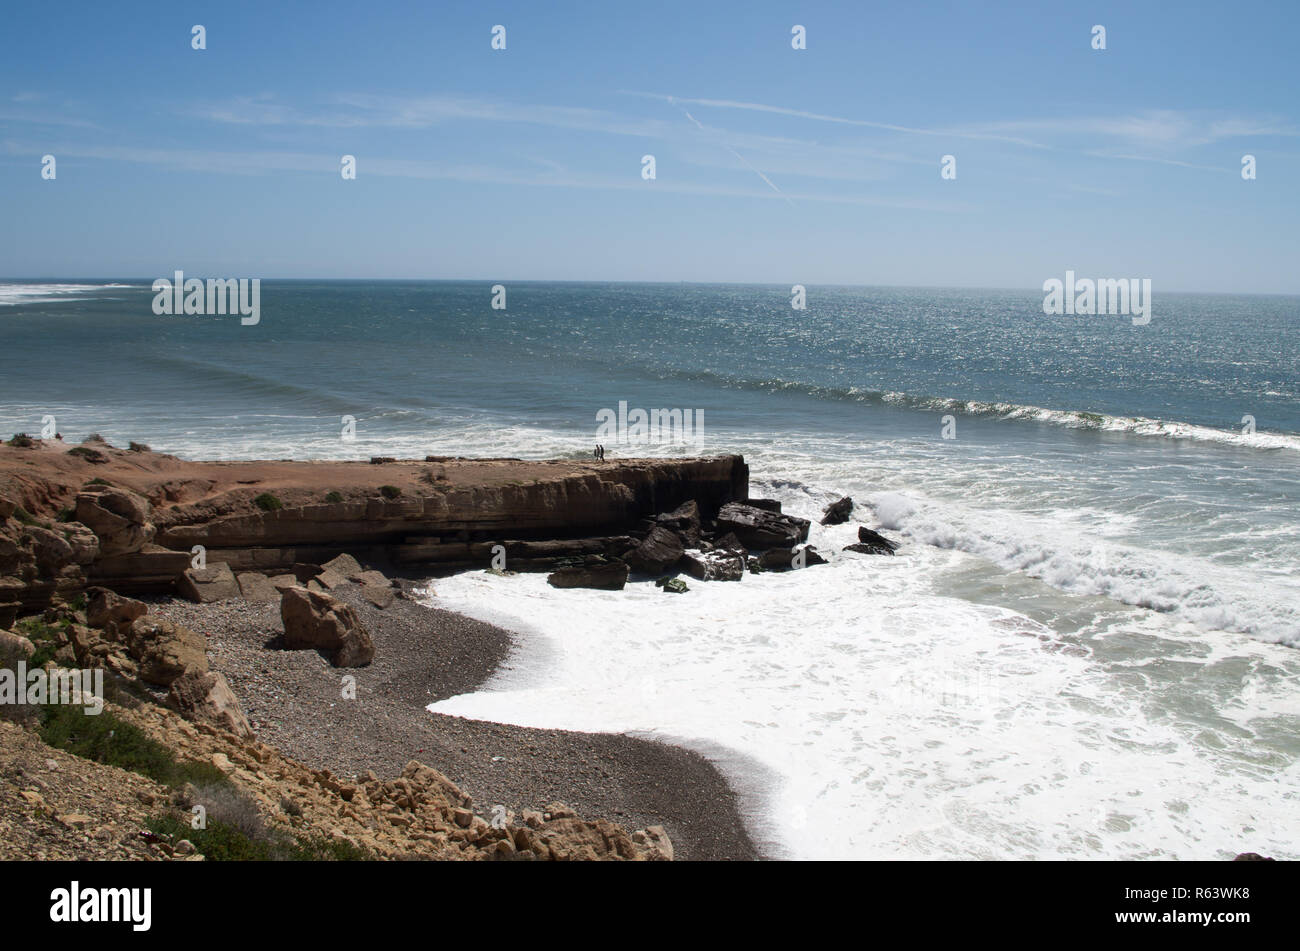 Rock formation at a Moroccan beach near Taghazout Stock Photo